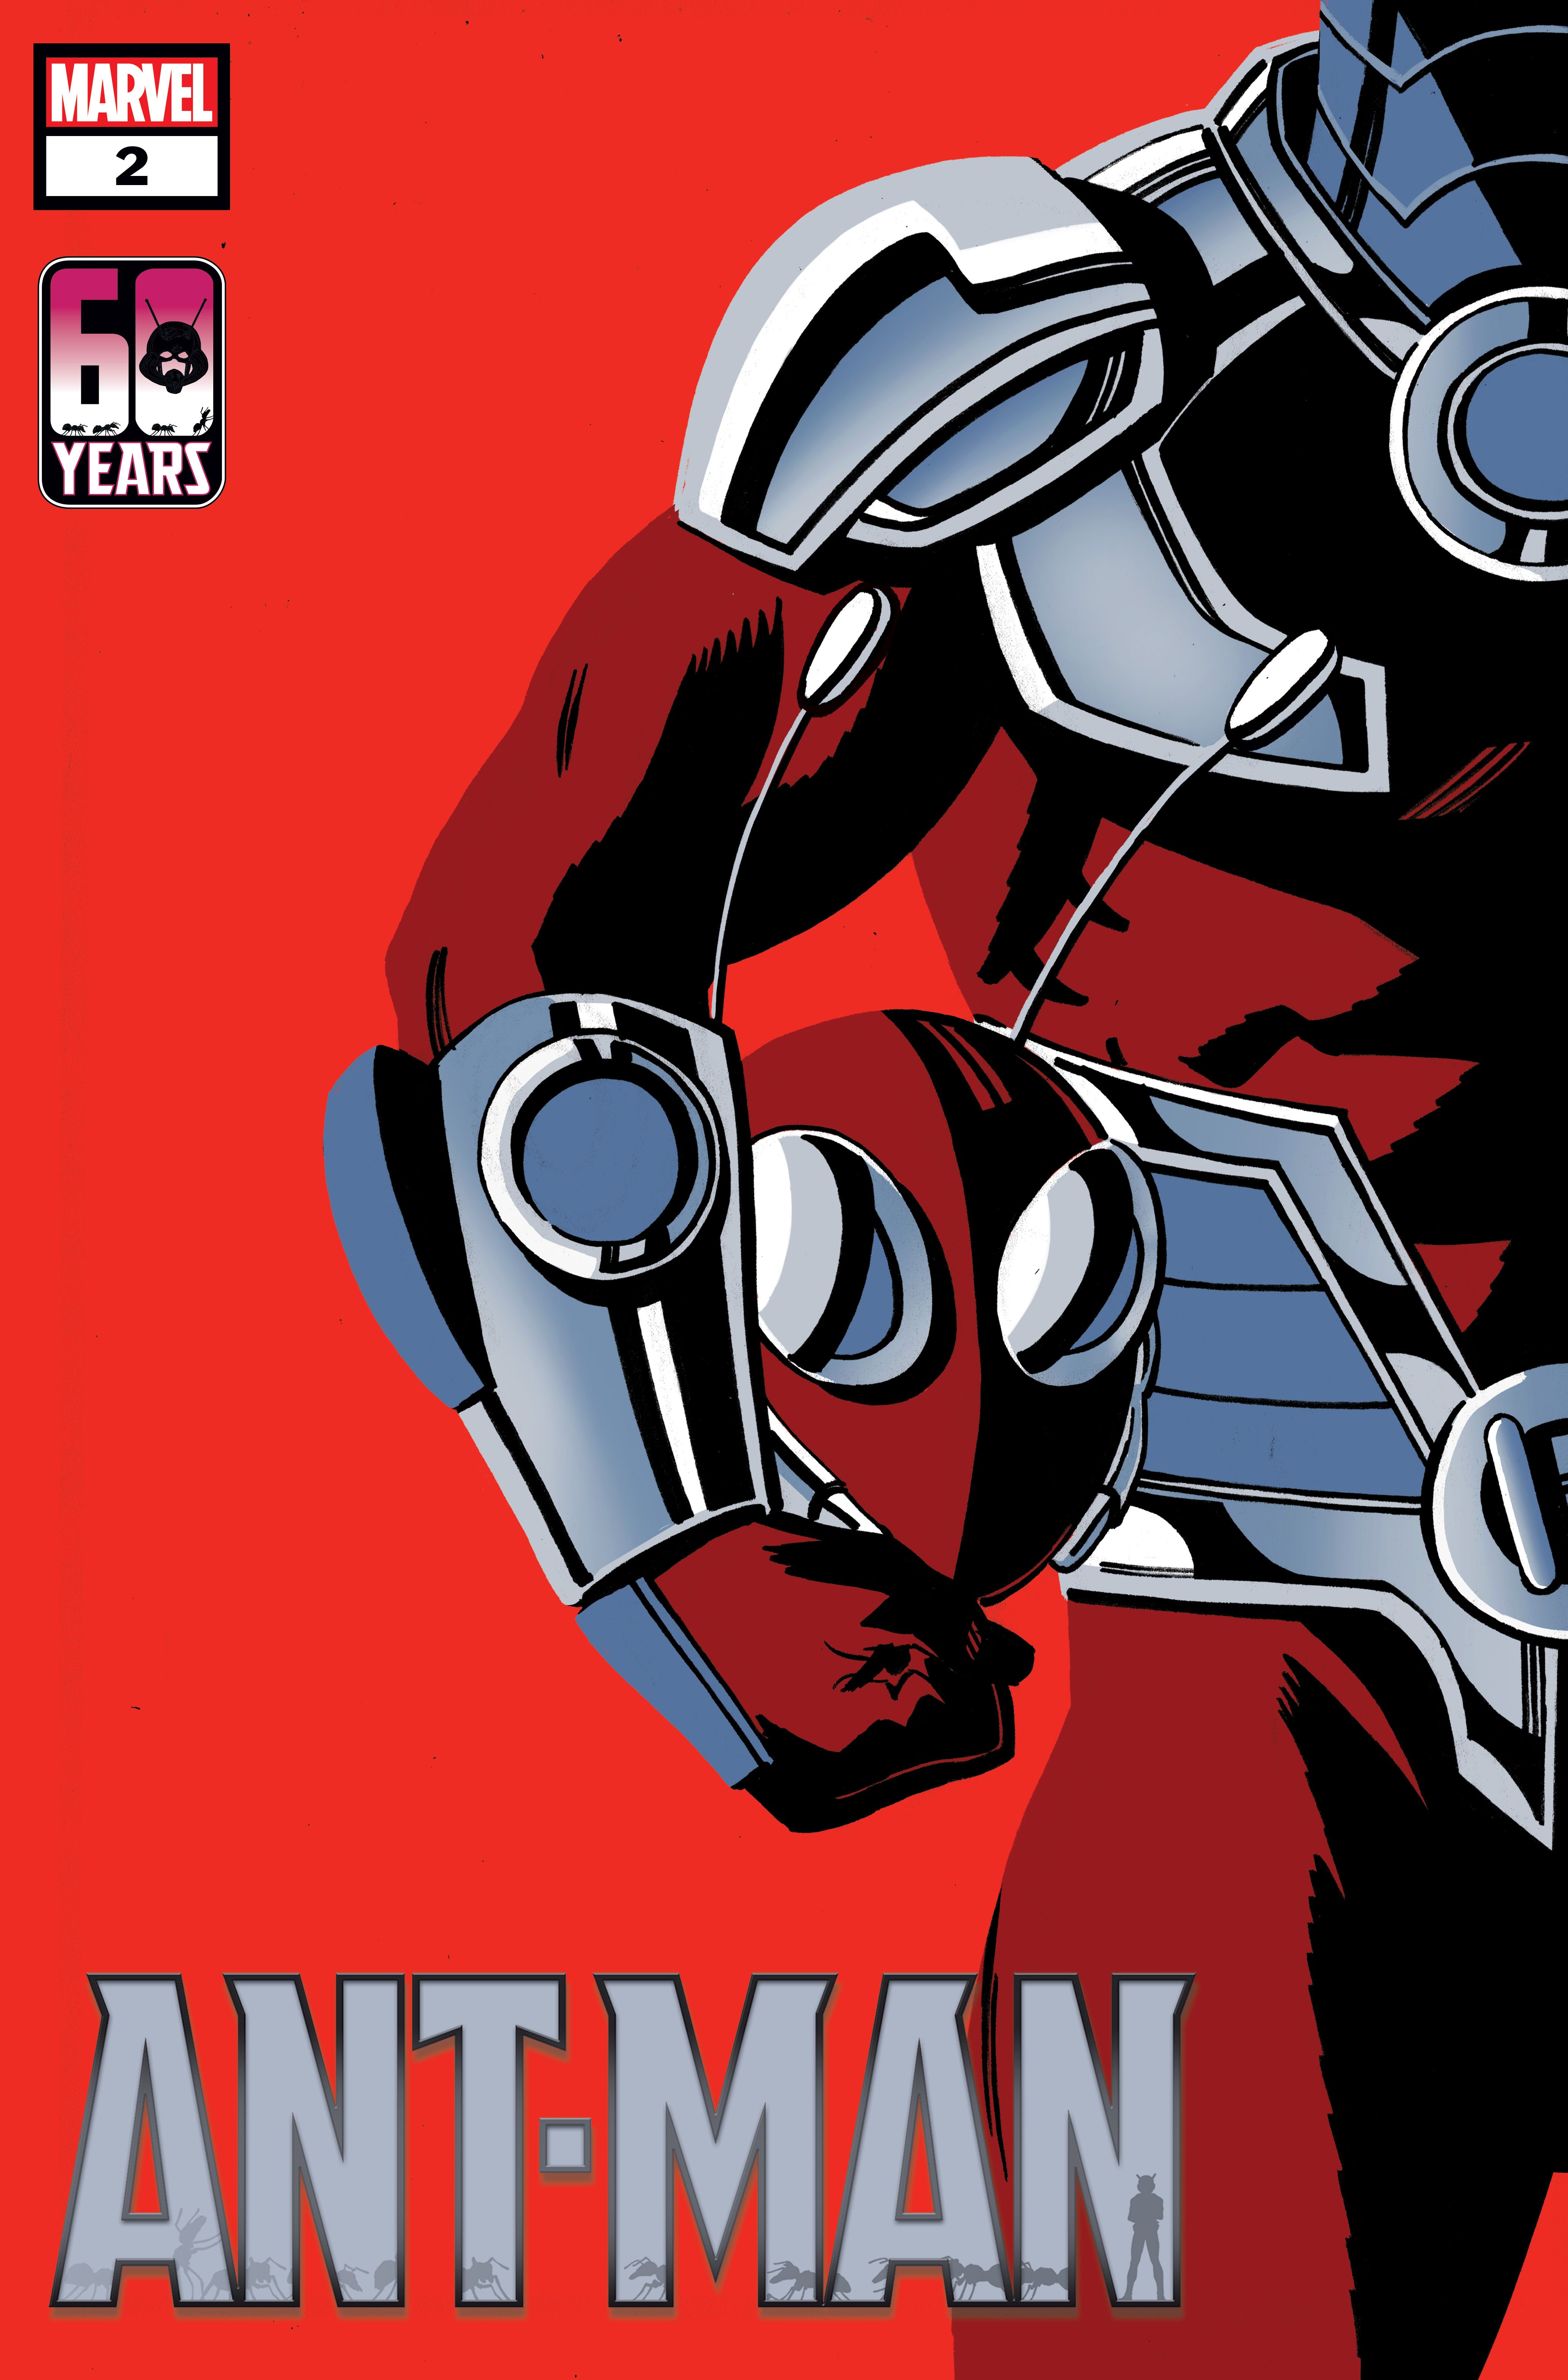 Ant-Man limited series issue 2 cover